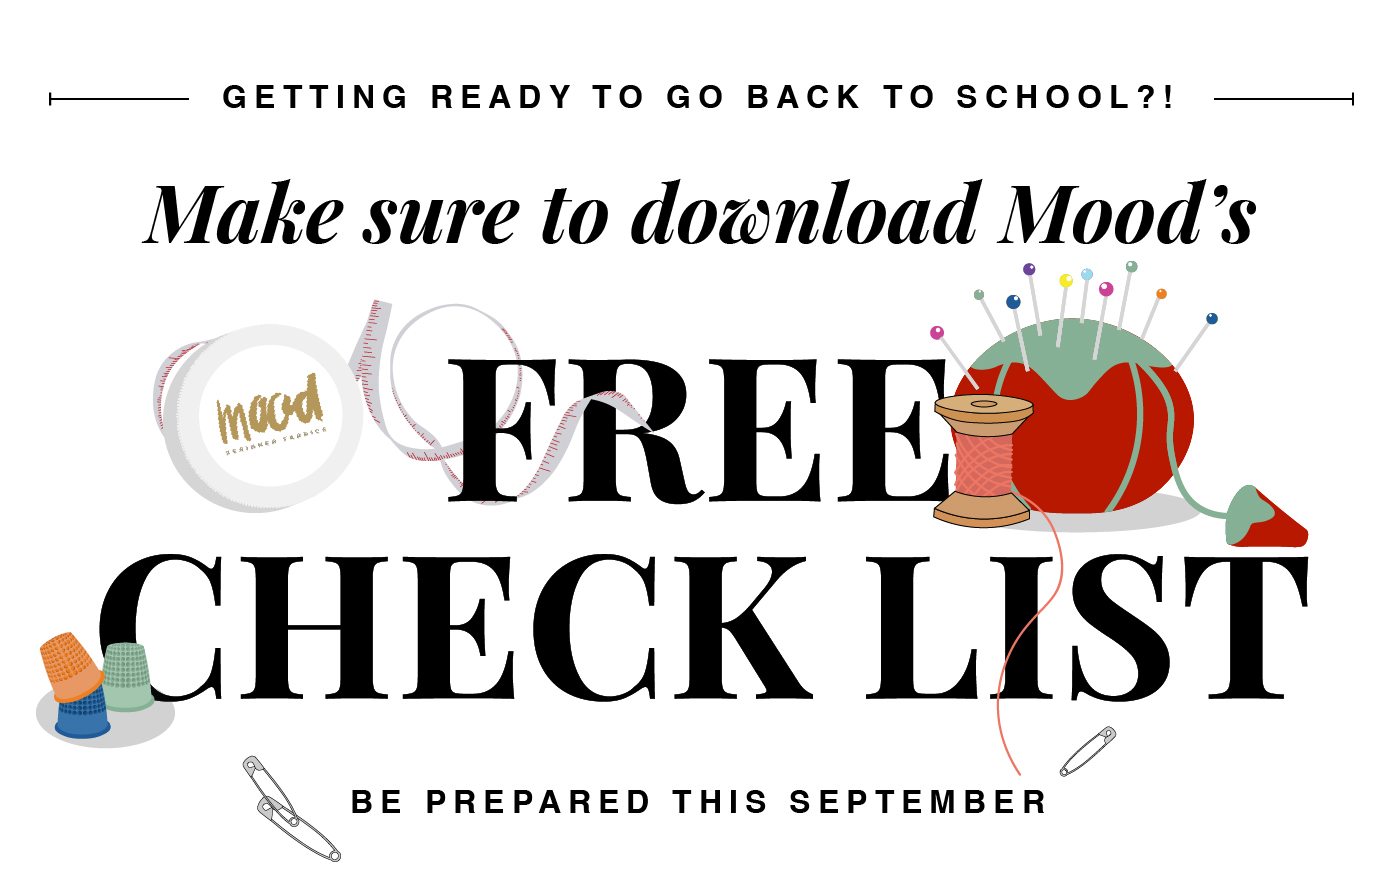 DOWNLOAD YOUR FREE BACK TO SCHOOL CHECK LIST!